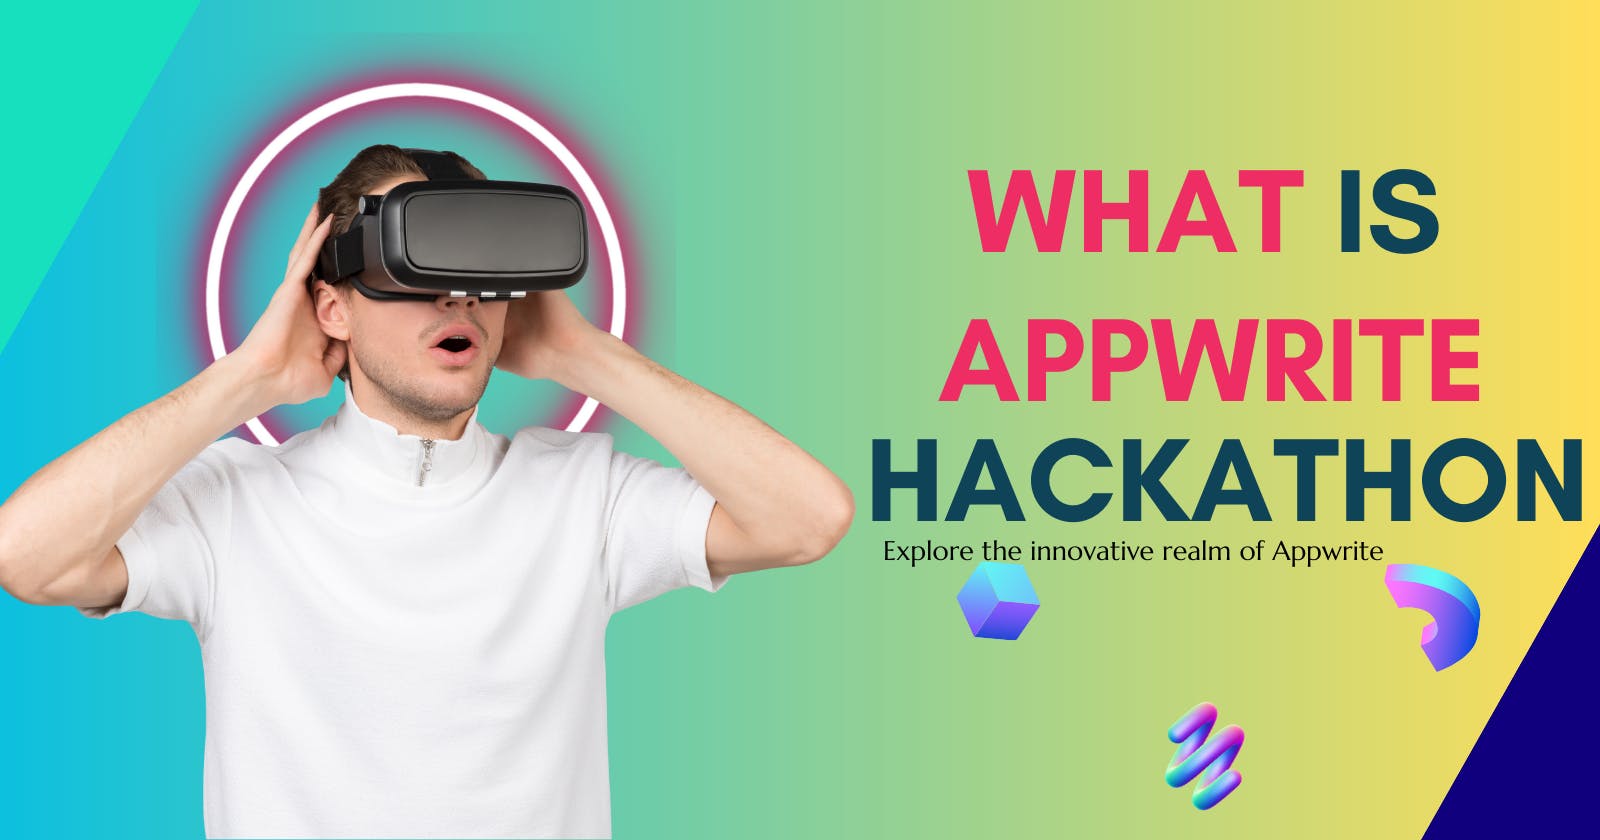 Join the Appwrite Hackathon on Hashnode!